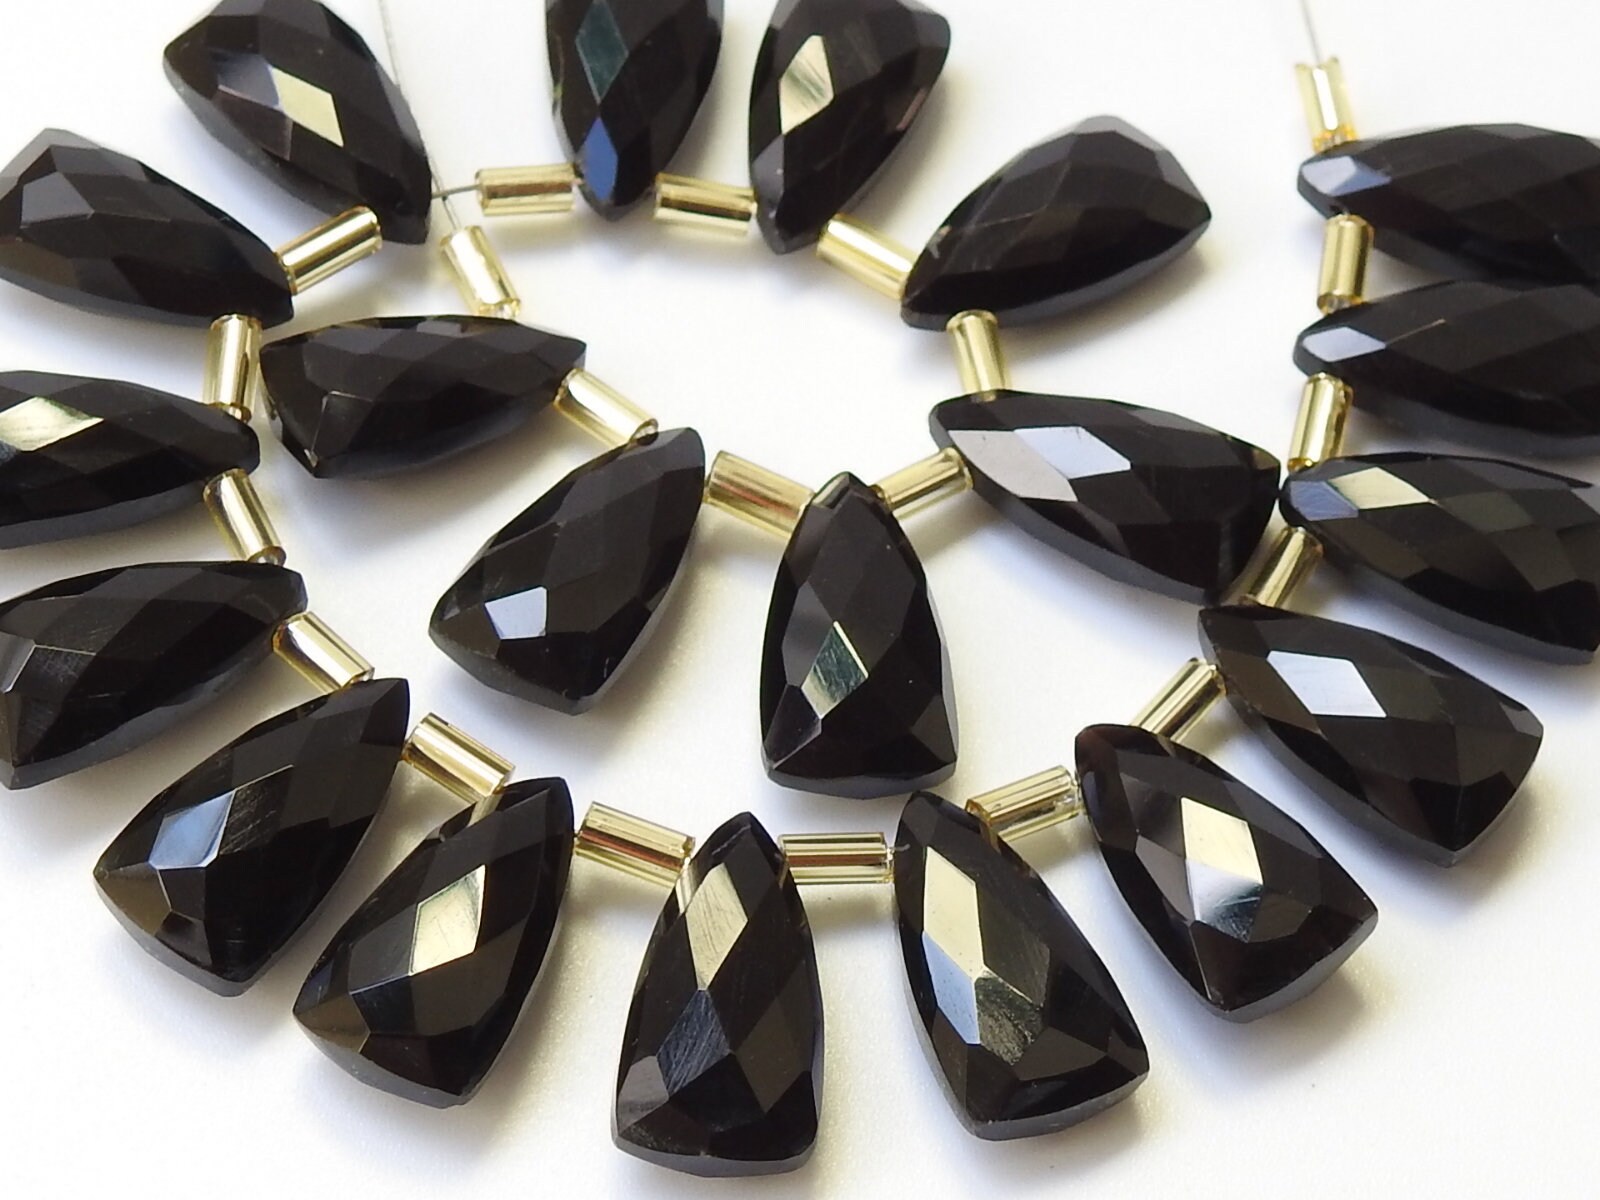 Black Onyx Long Triangle,Trillion,Pyramid,Teardrop,Drop,Briolettes,Faceted,Earrings Pair,Wholesale Price,New Arrival 15X8MM Approx PME-CY2 | Save 33% - Rajasthan Living 13